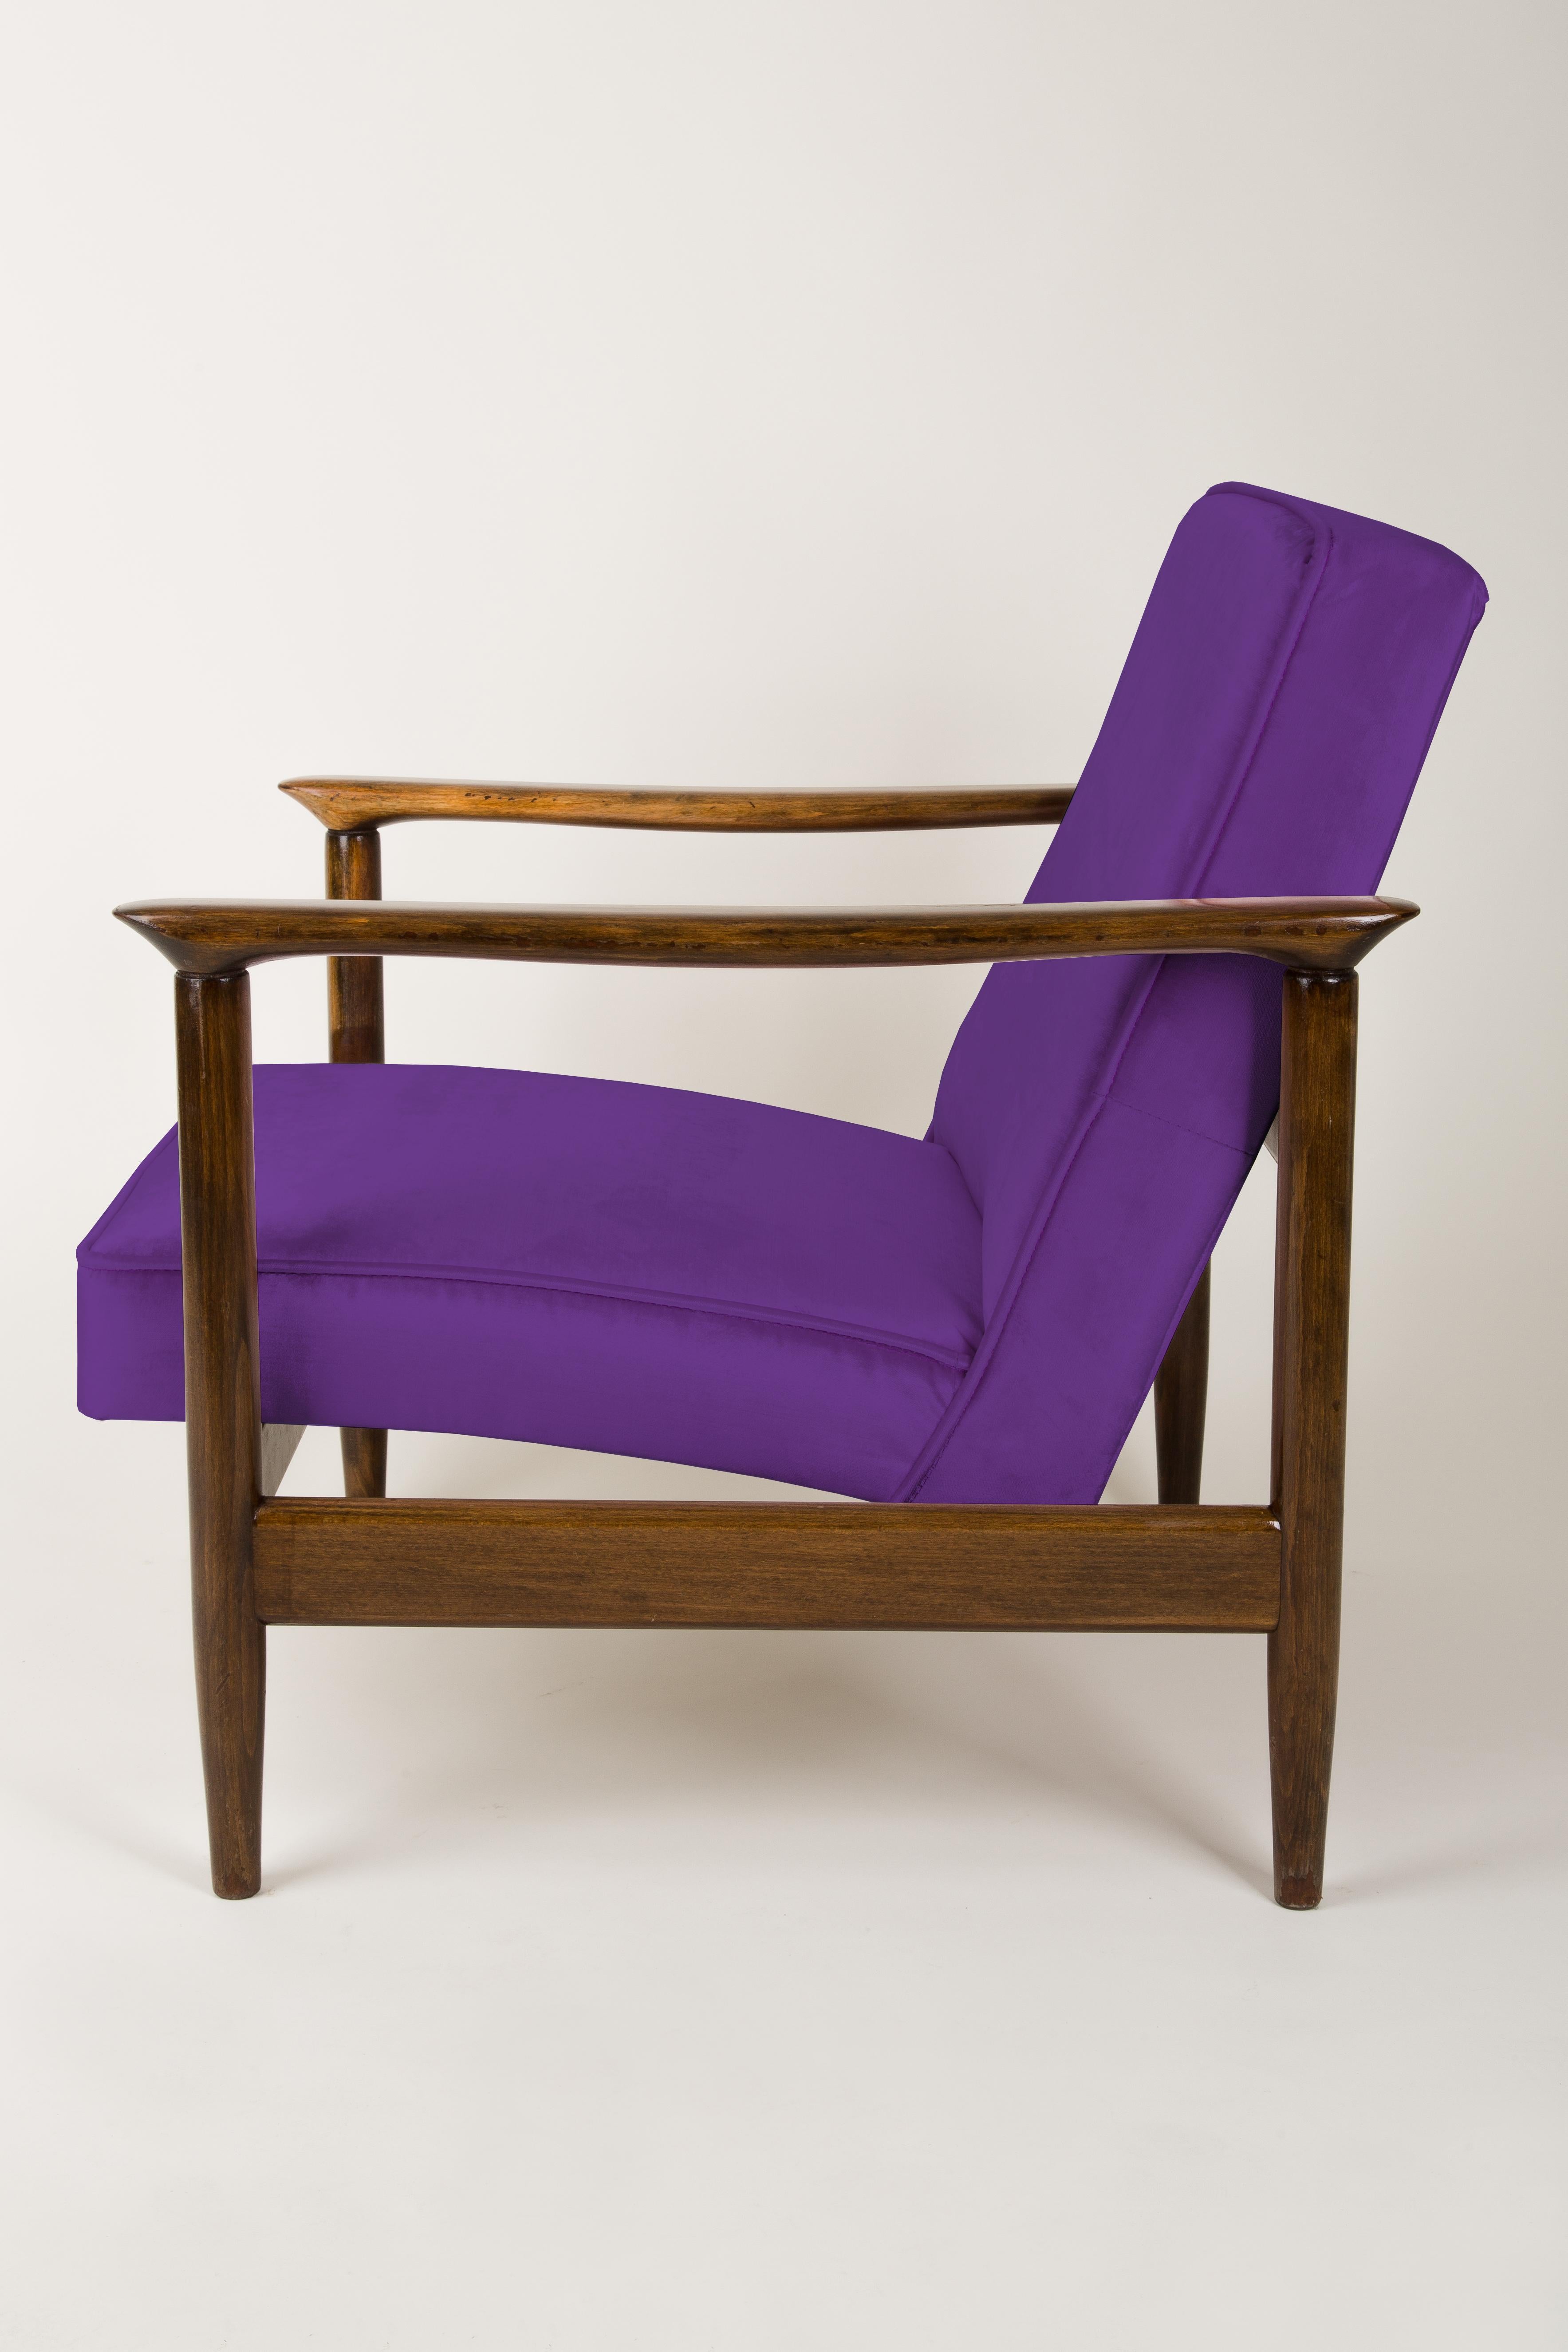 Hand-Crafted Pair of Purple Violet Armchairs, Edmund Homa, GFM-142, 1960s, Poland For Sale